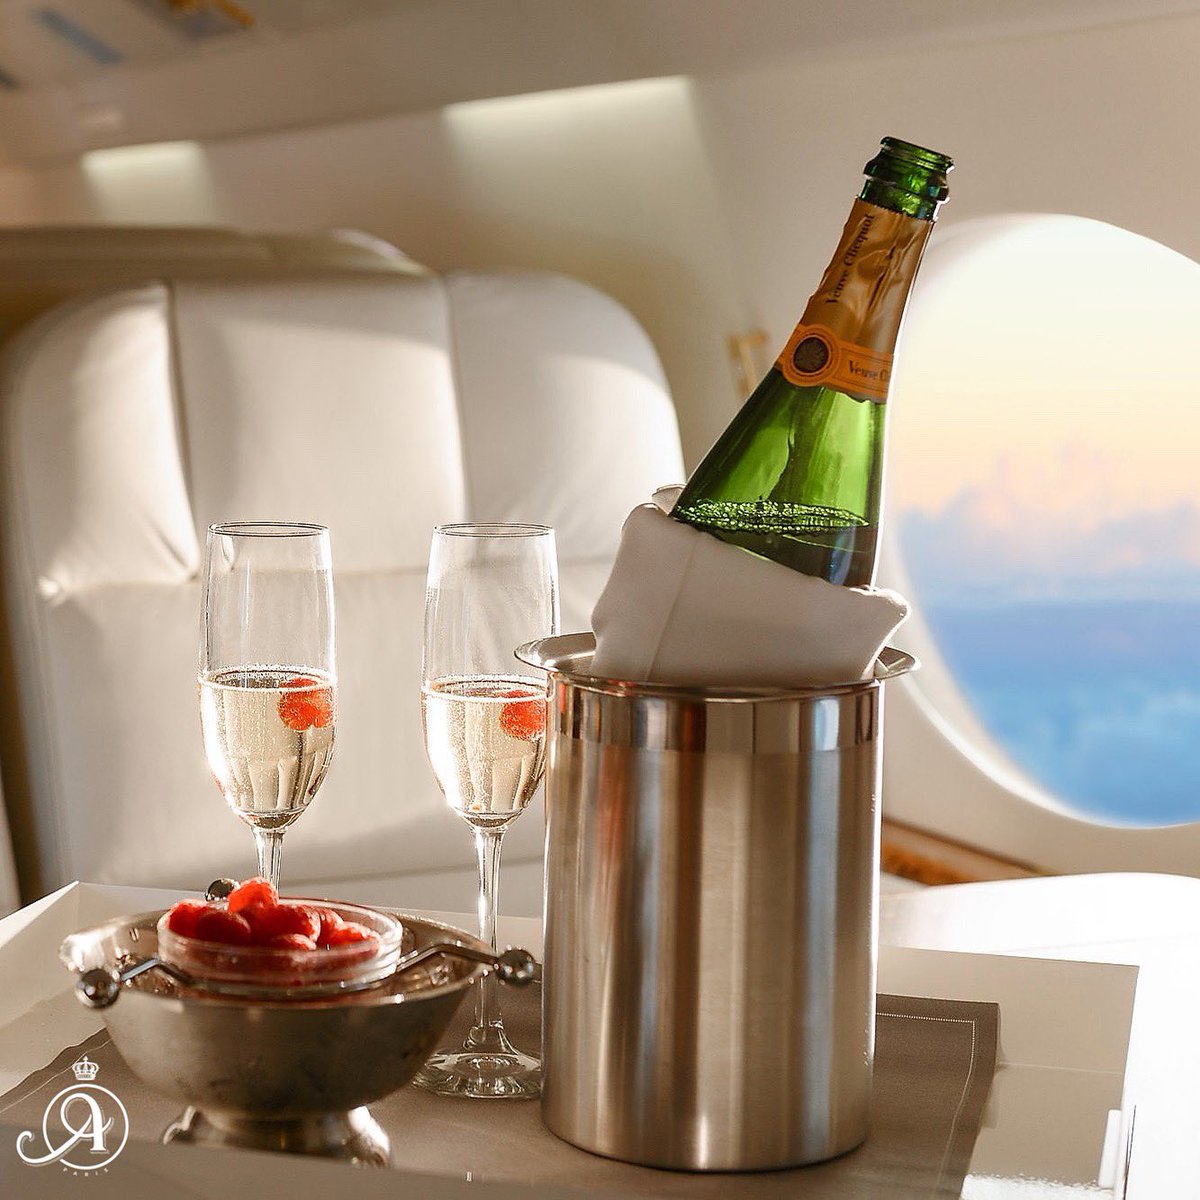 Flying by private jet with us does not only consist in making a reservation ! 🛩🥂

#privatejet #privatejets  #jet #luxuryjet #privatejetlife  #businesstravel  #businessaviation #VIP  #tomakethedifference  #luxuryaviation #veuveclicquot  #moethennessy #moetchandon #moet